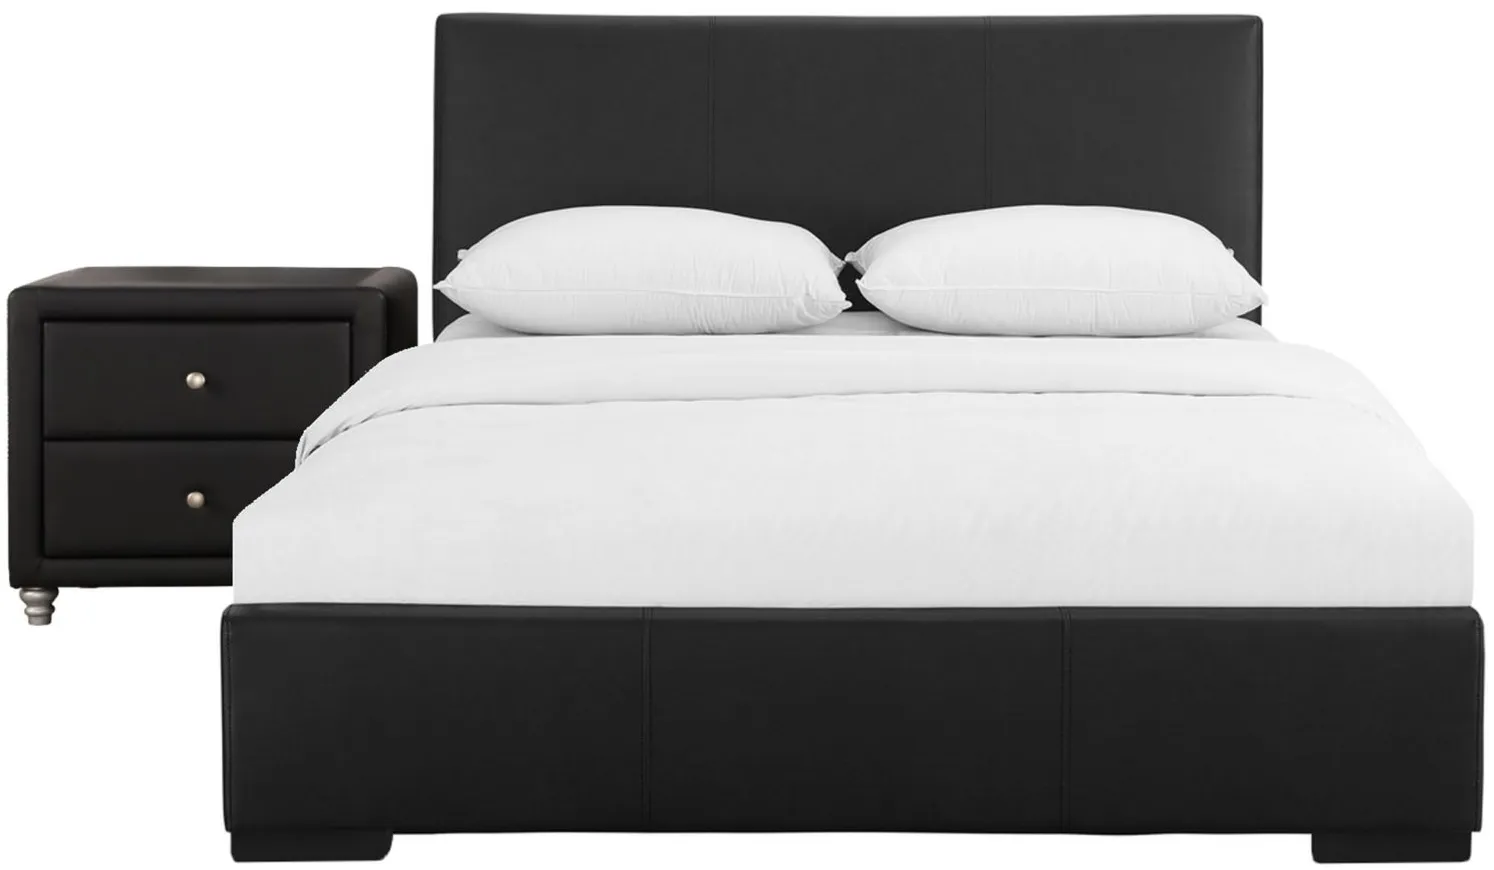 Hindes Platform Bed with 1 Nightstand in Black by CAMDEN ISLE